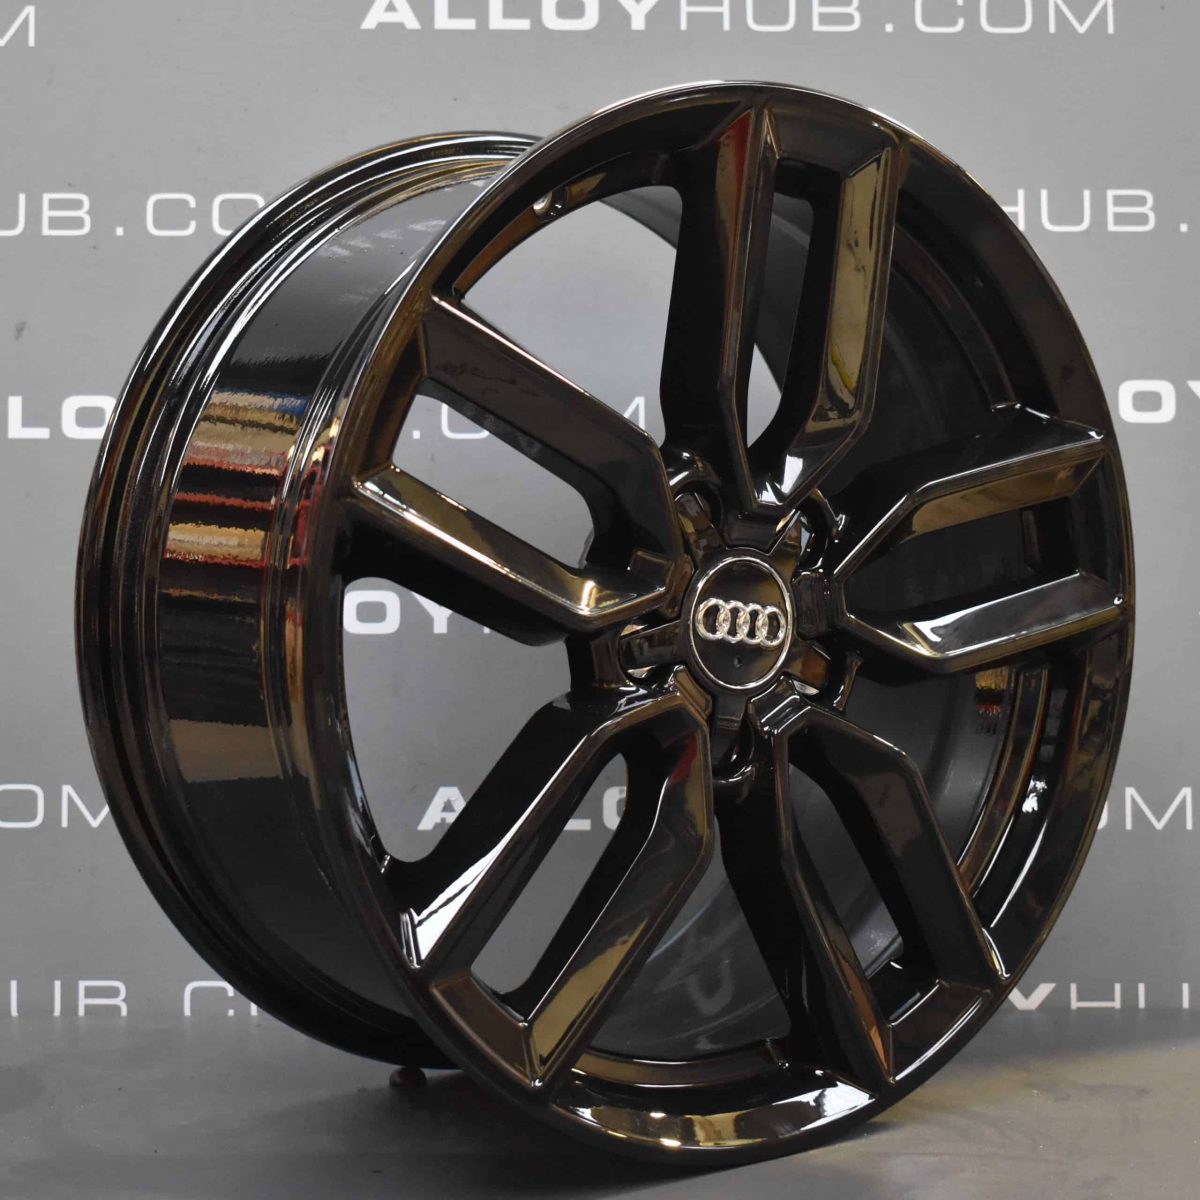 Genuine Audi S3 RS3 A3 8P 5 Twin Spoke 18" Inch Alloy Wheels with Gloss Black Finish 8V0 601 025 M